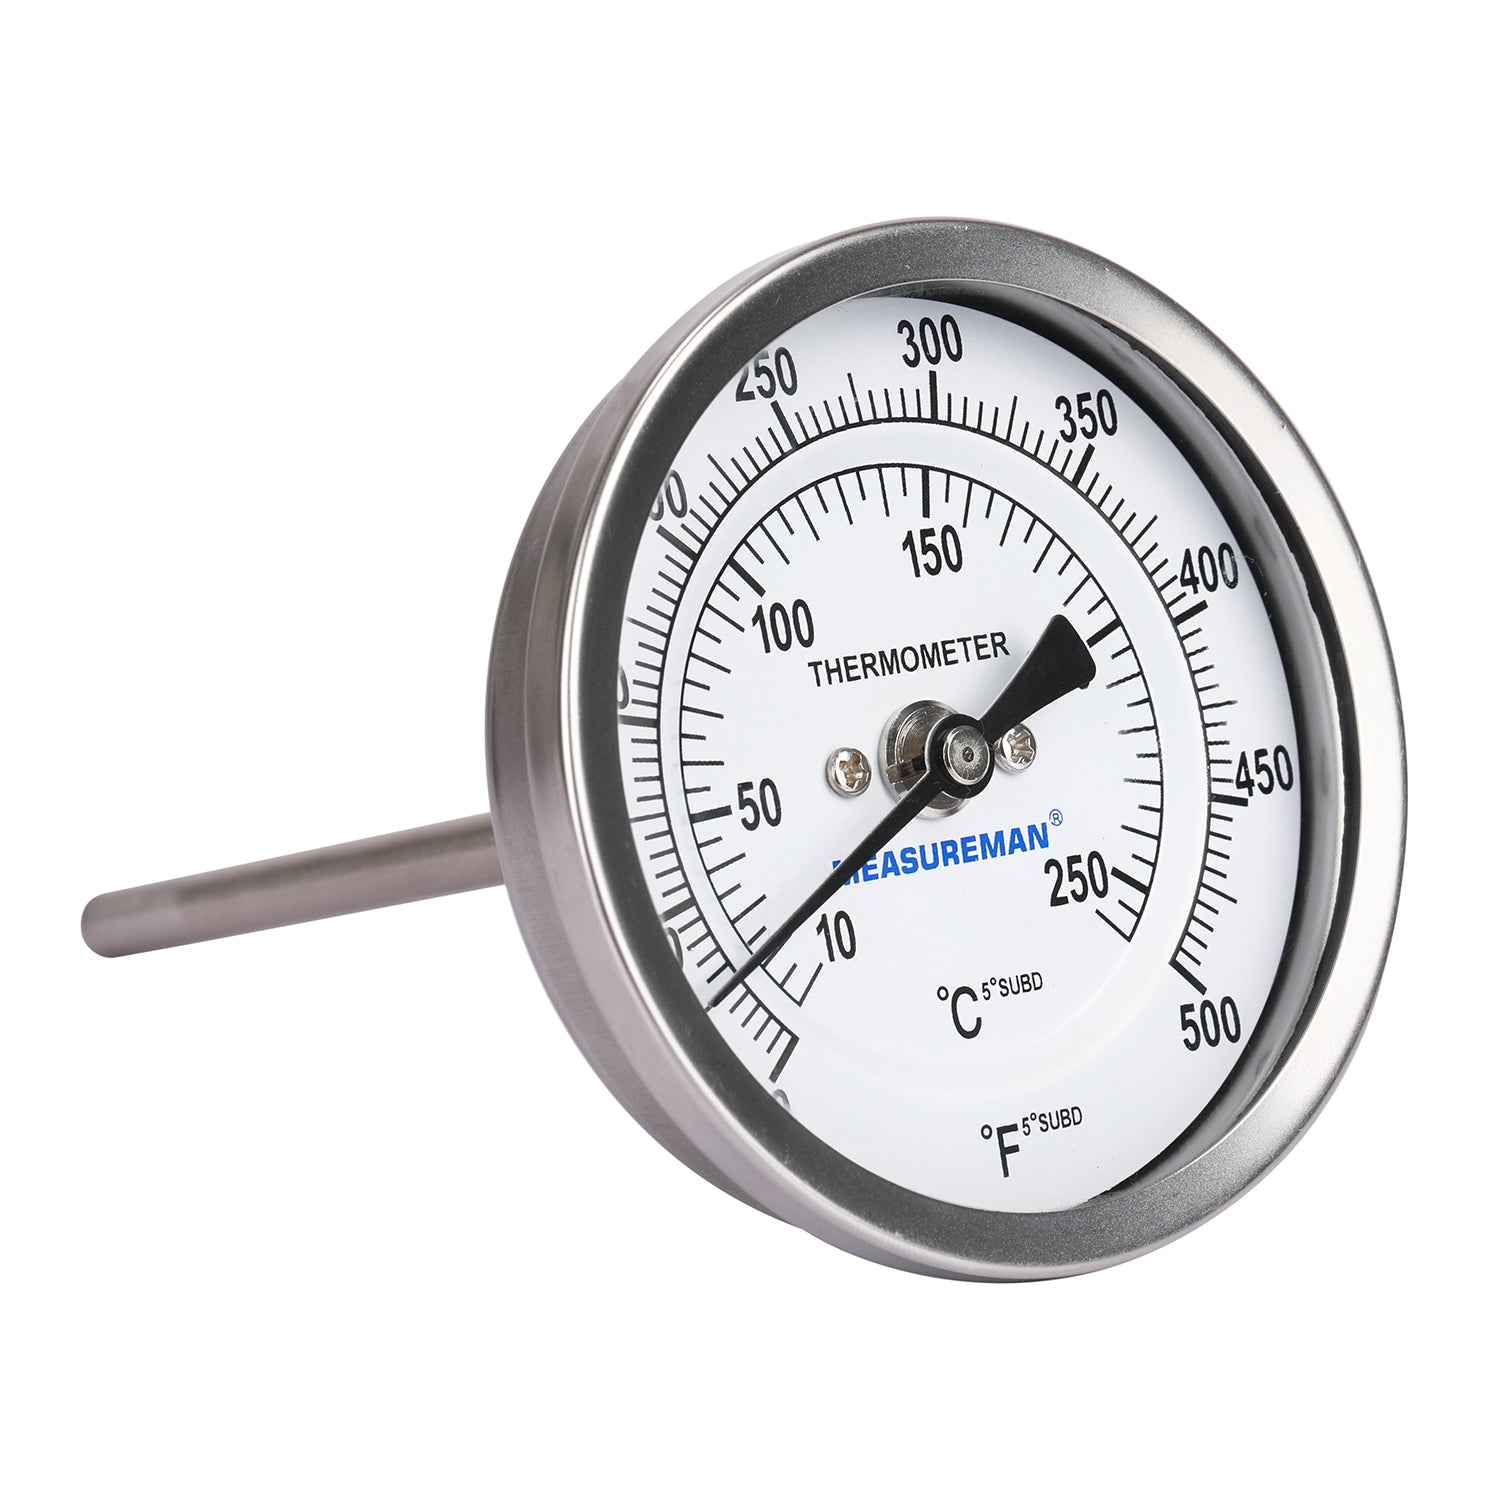 Dial Thermometer, Stainless Steel Thermometer for Home Brewing, 1/2 NPT  Kettle Thermometer with Lock Nut & O-Ring(3 Face)